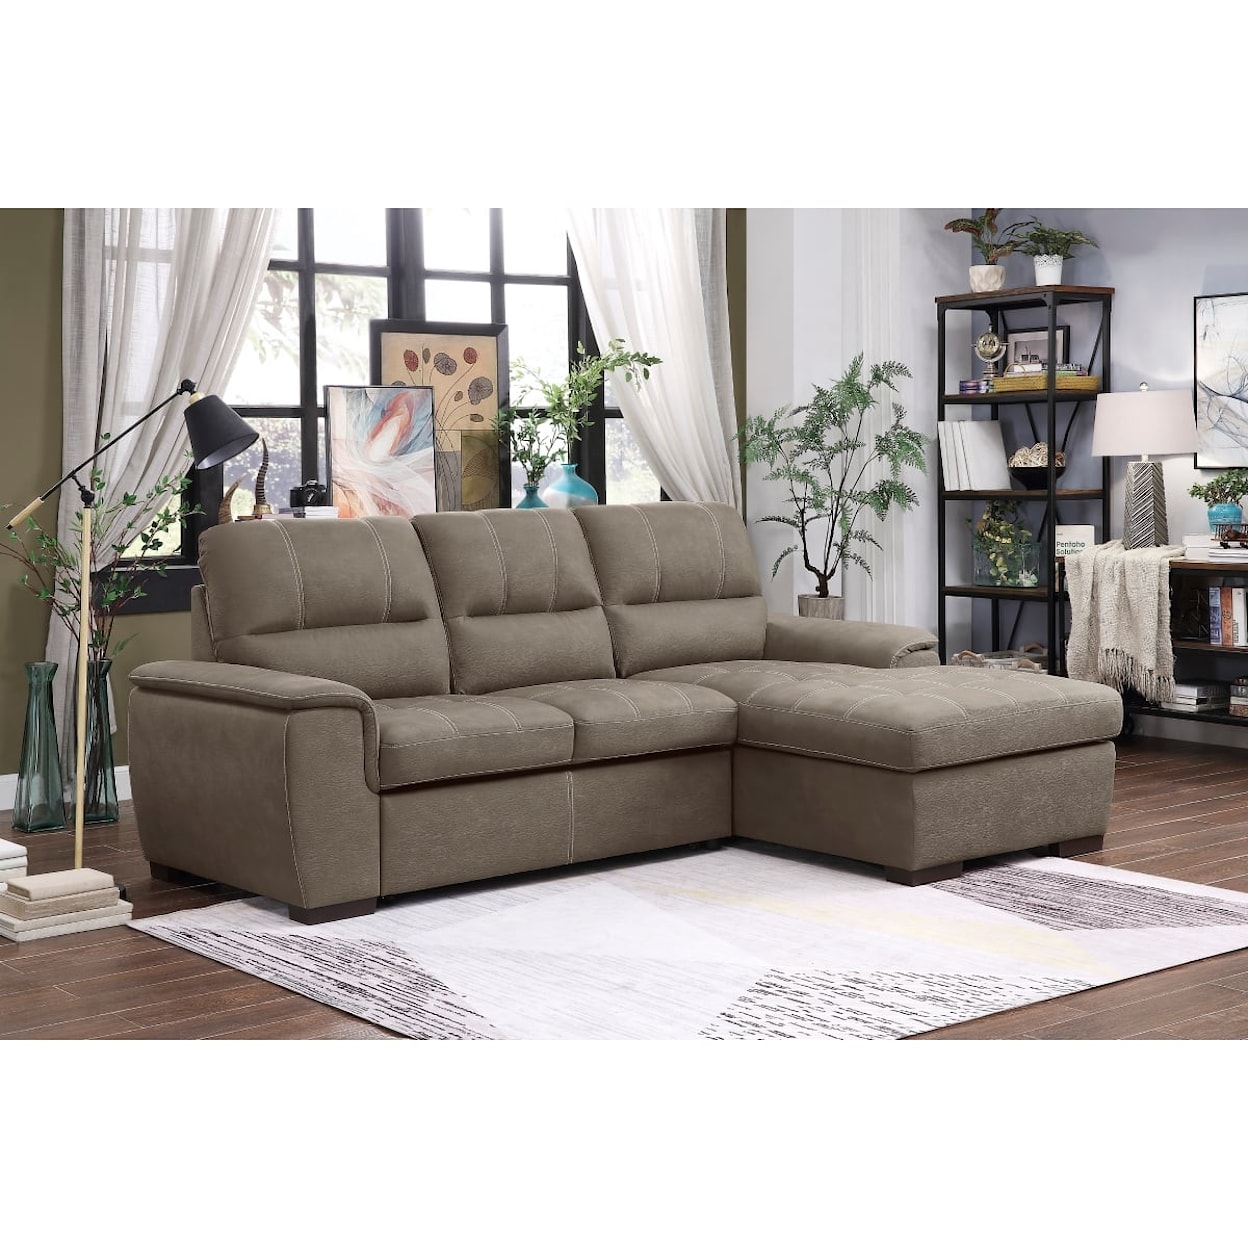 Homelegance Furniture Andes 2-Piece Sectional Sofa